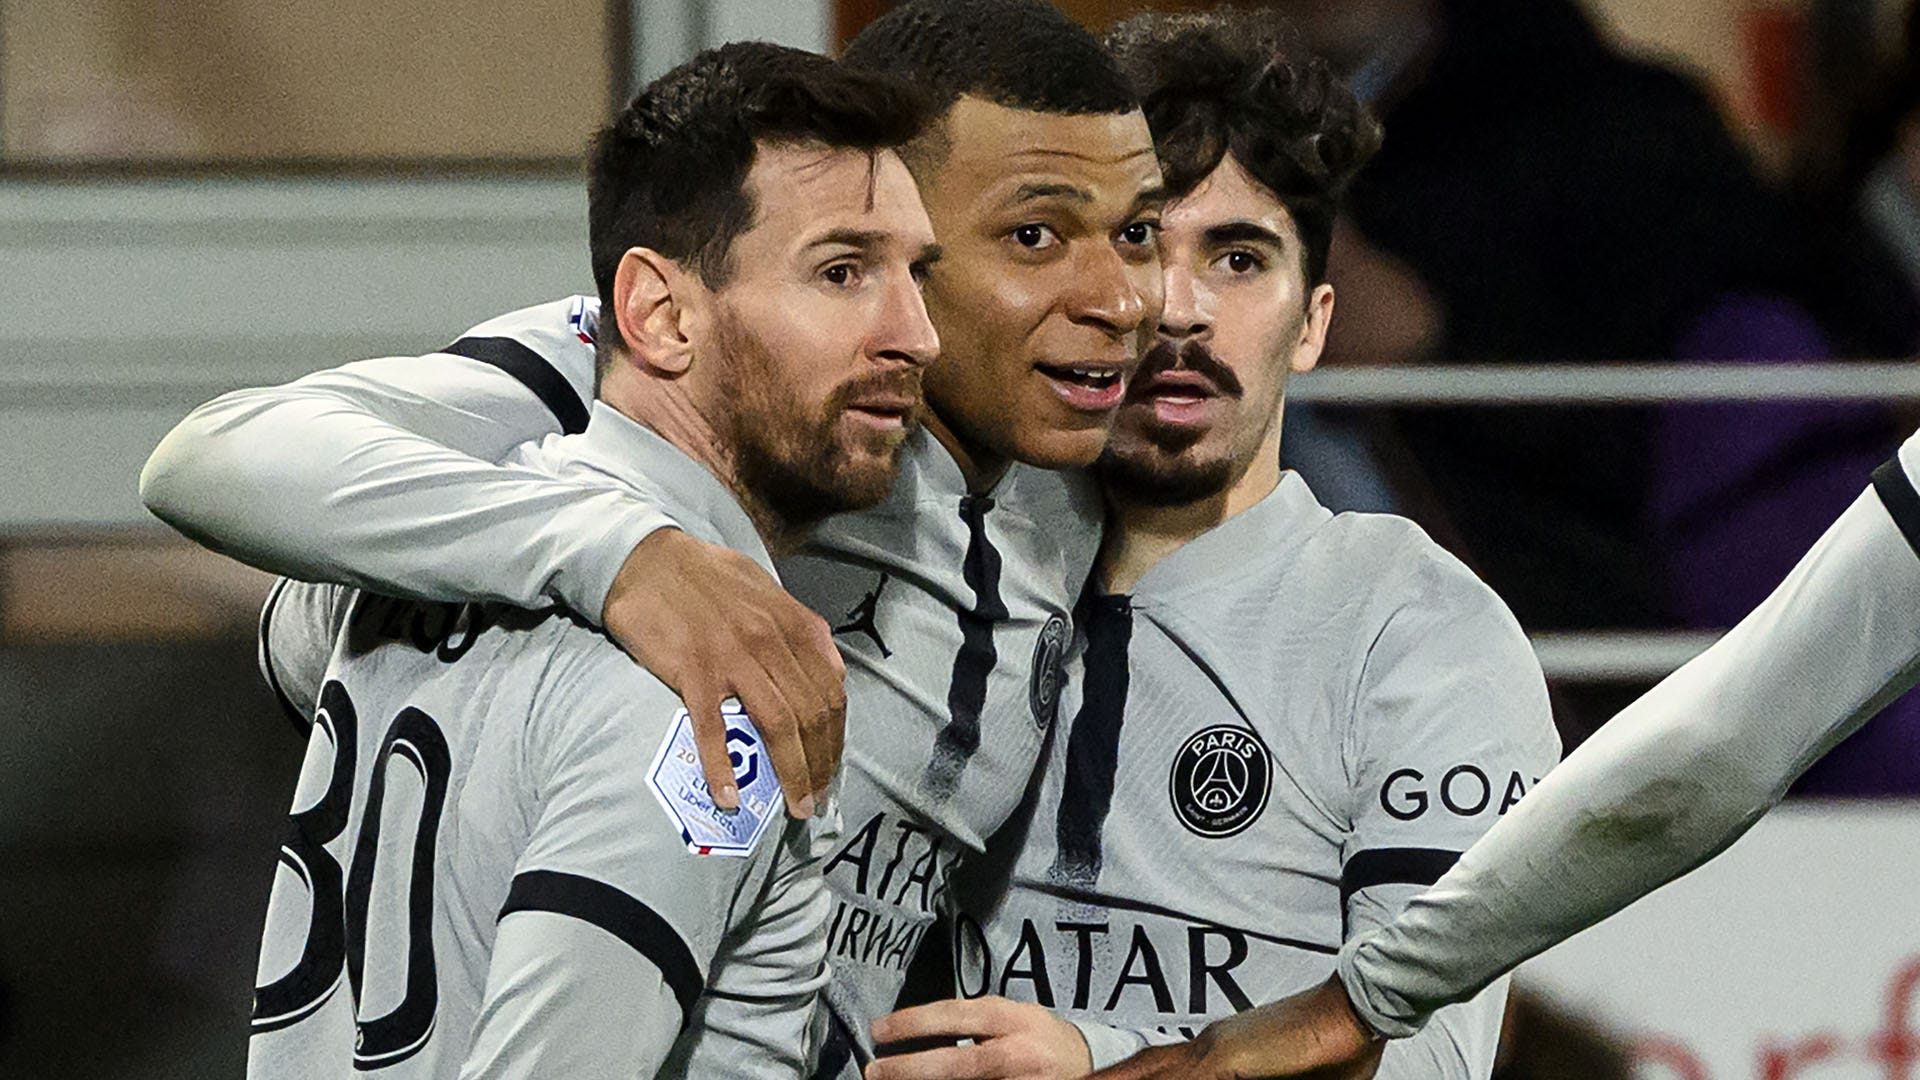 PSG player ratings vs Brest Kylian Mbappe and Lionel Messi connect for late winner but Ligue 1 leaders still look out of sorts Goal English Saudi Arabia